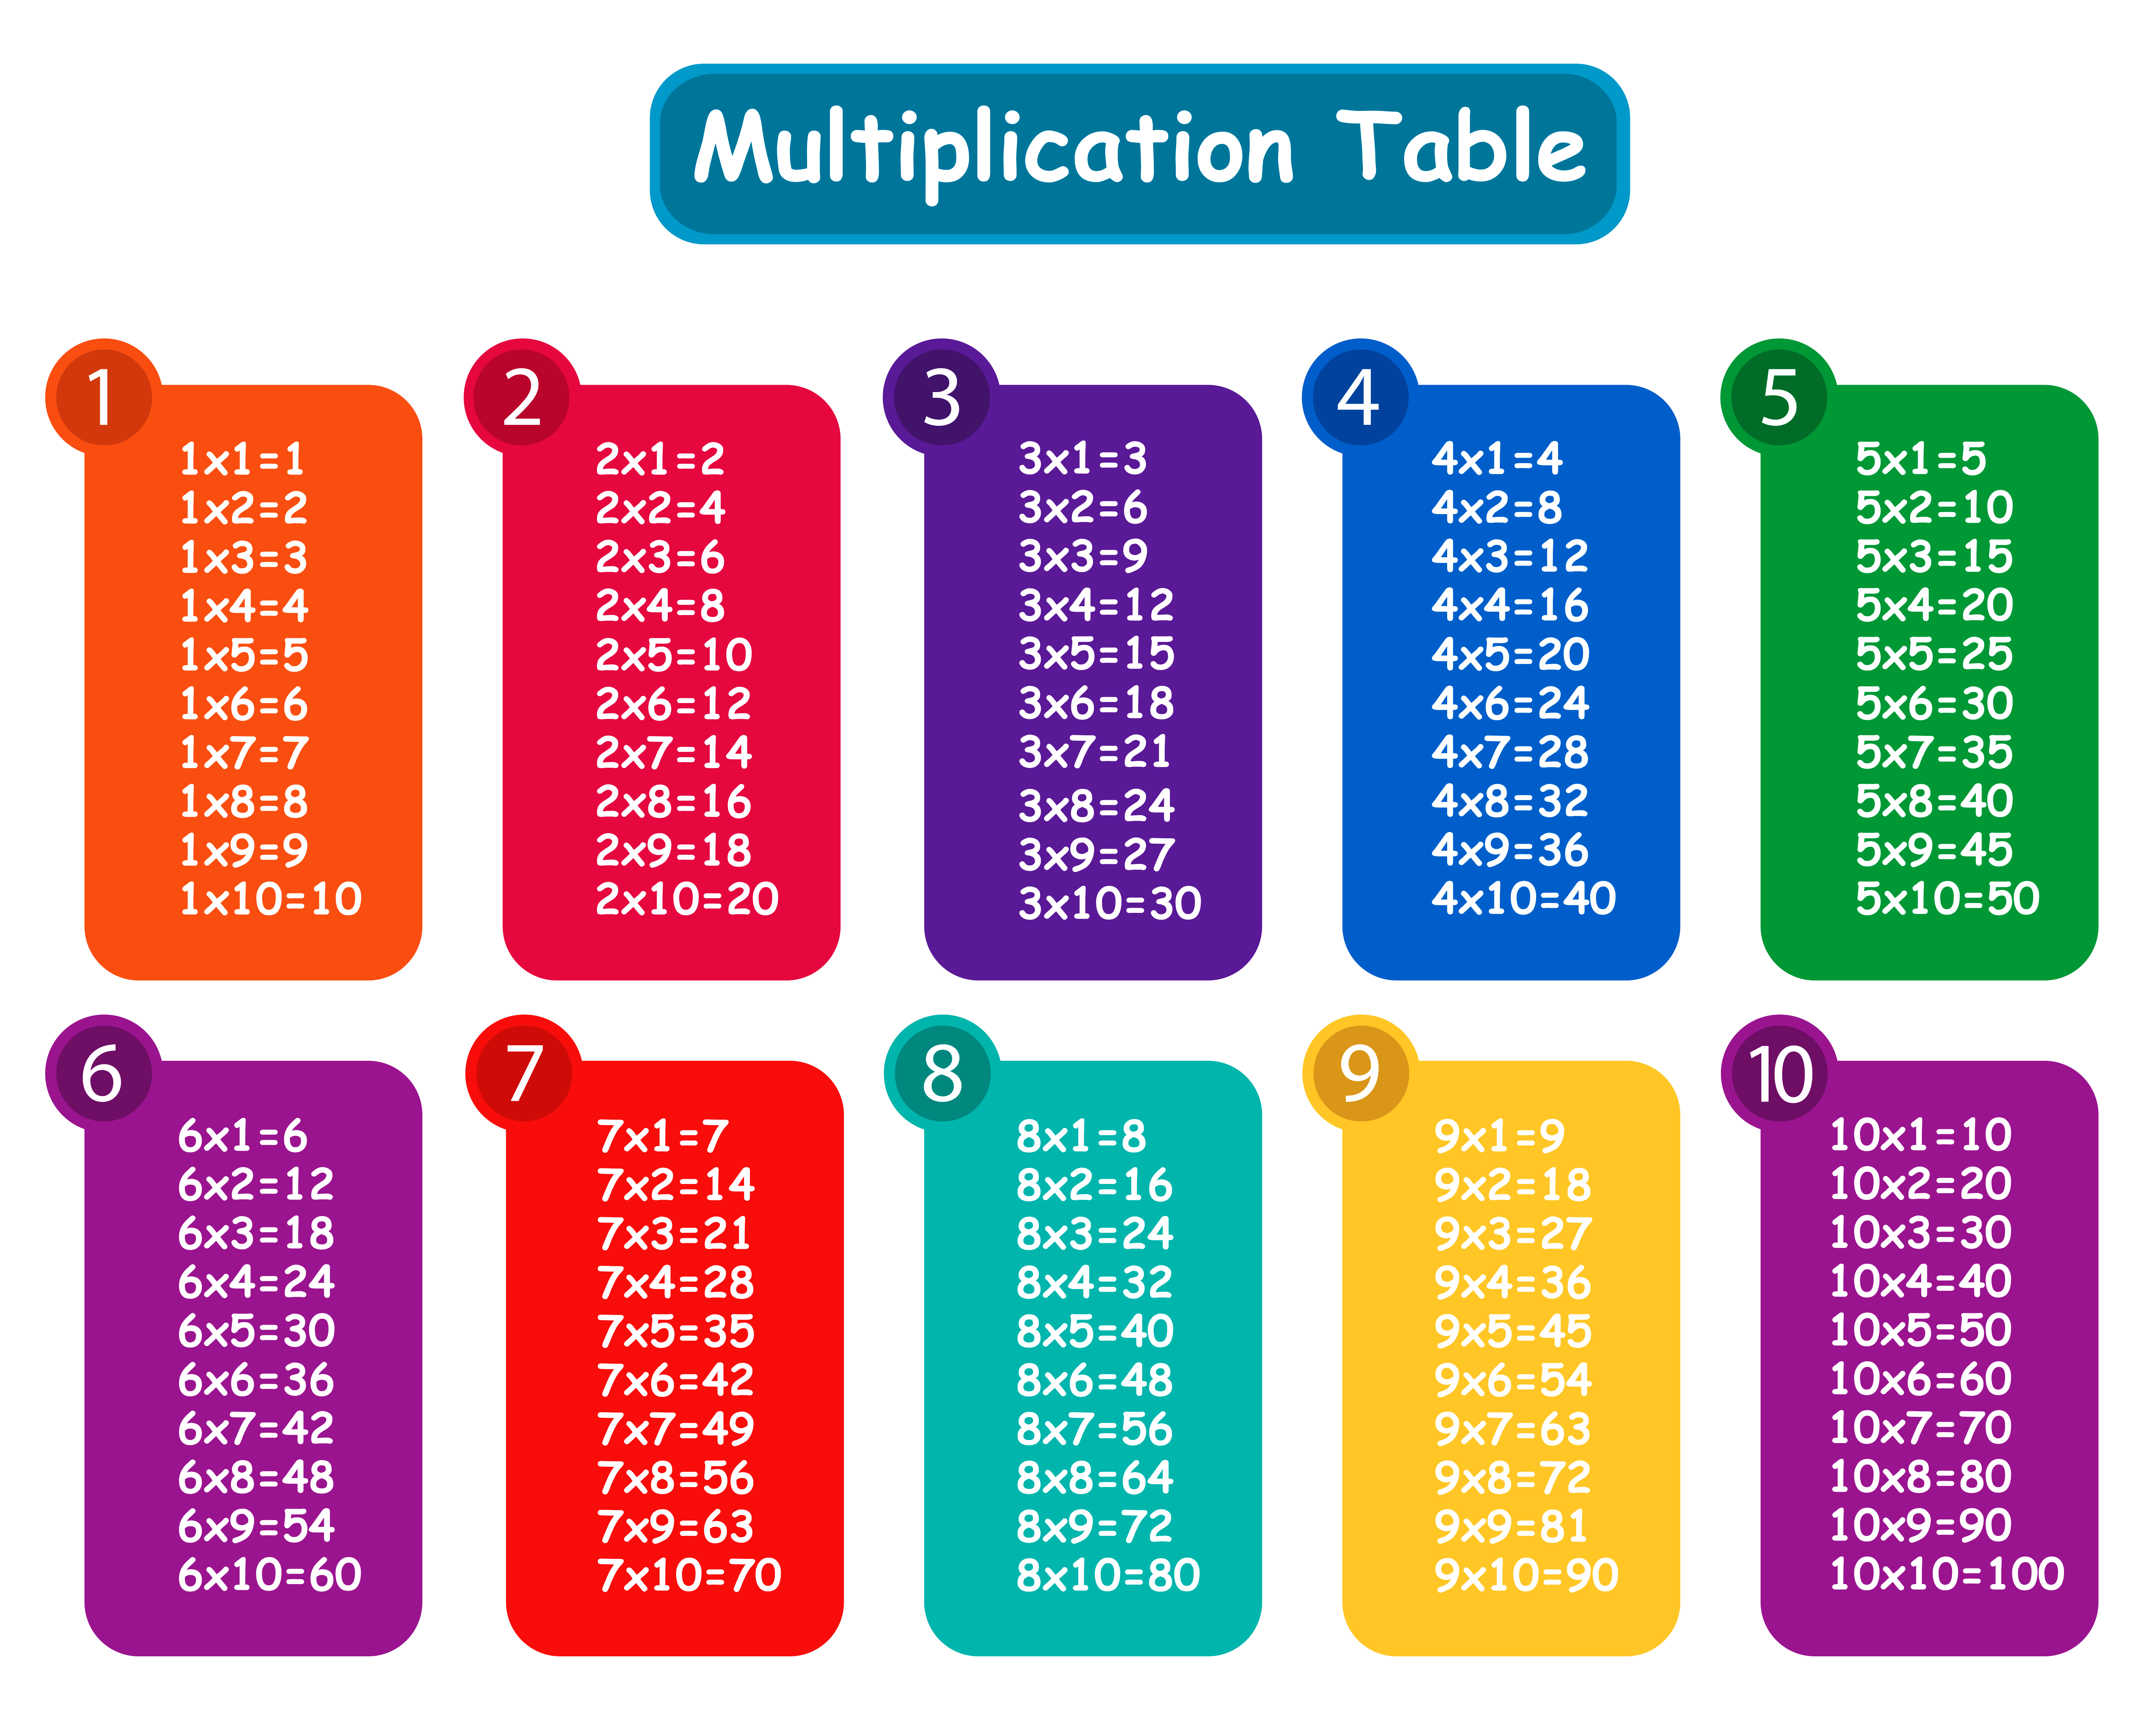 multiplication-table-1-12-amazon-com-cxwind-learning-multiplication-table-chart-numbers-1-12